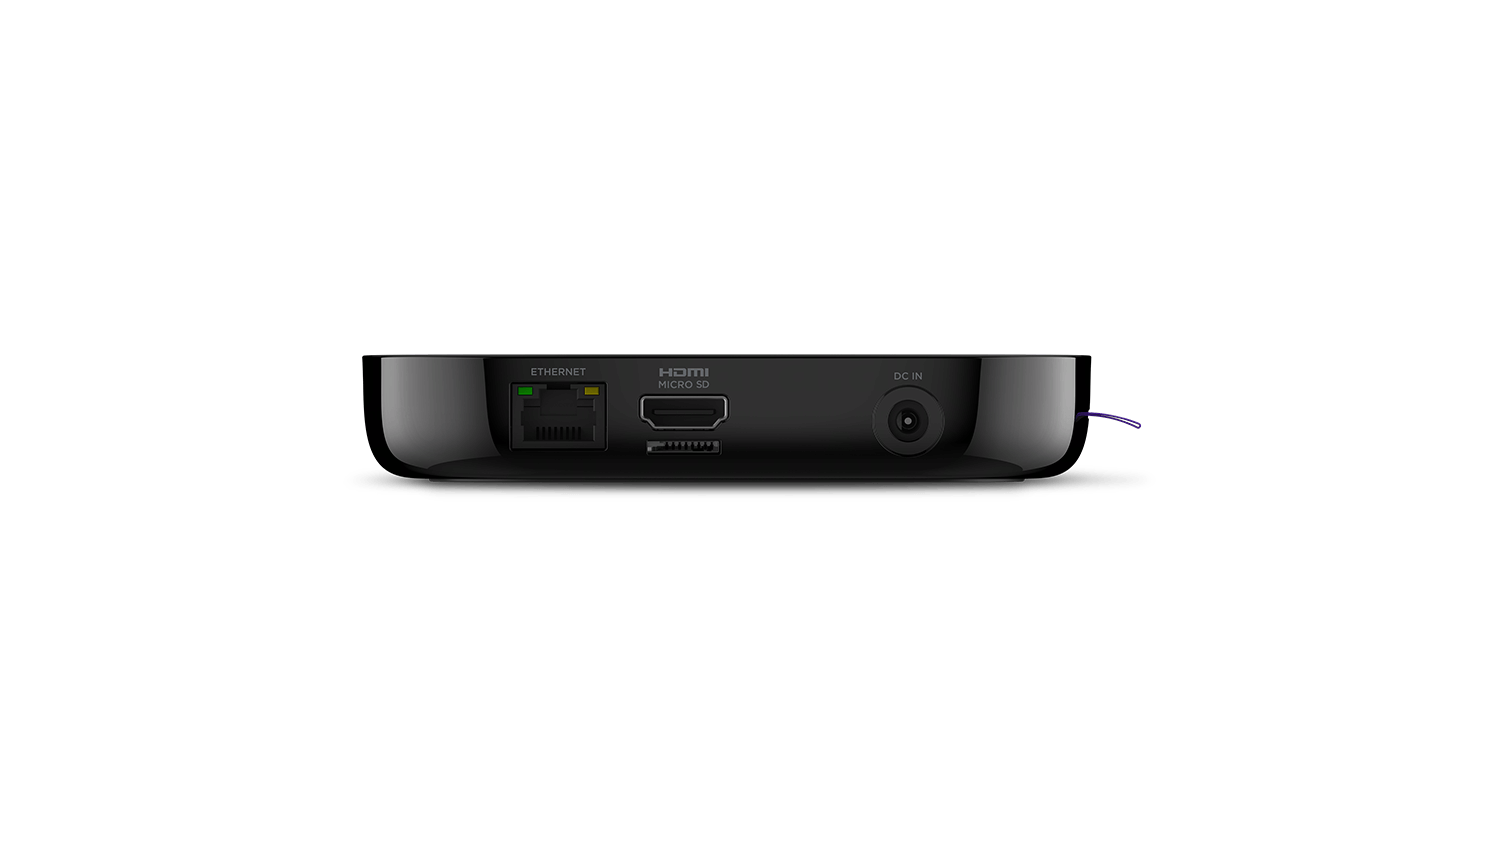 Roku Ultra 4K HDR Streaming Player with voice remote (2017) - image 3 of 8